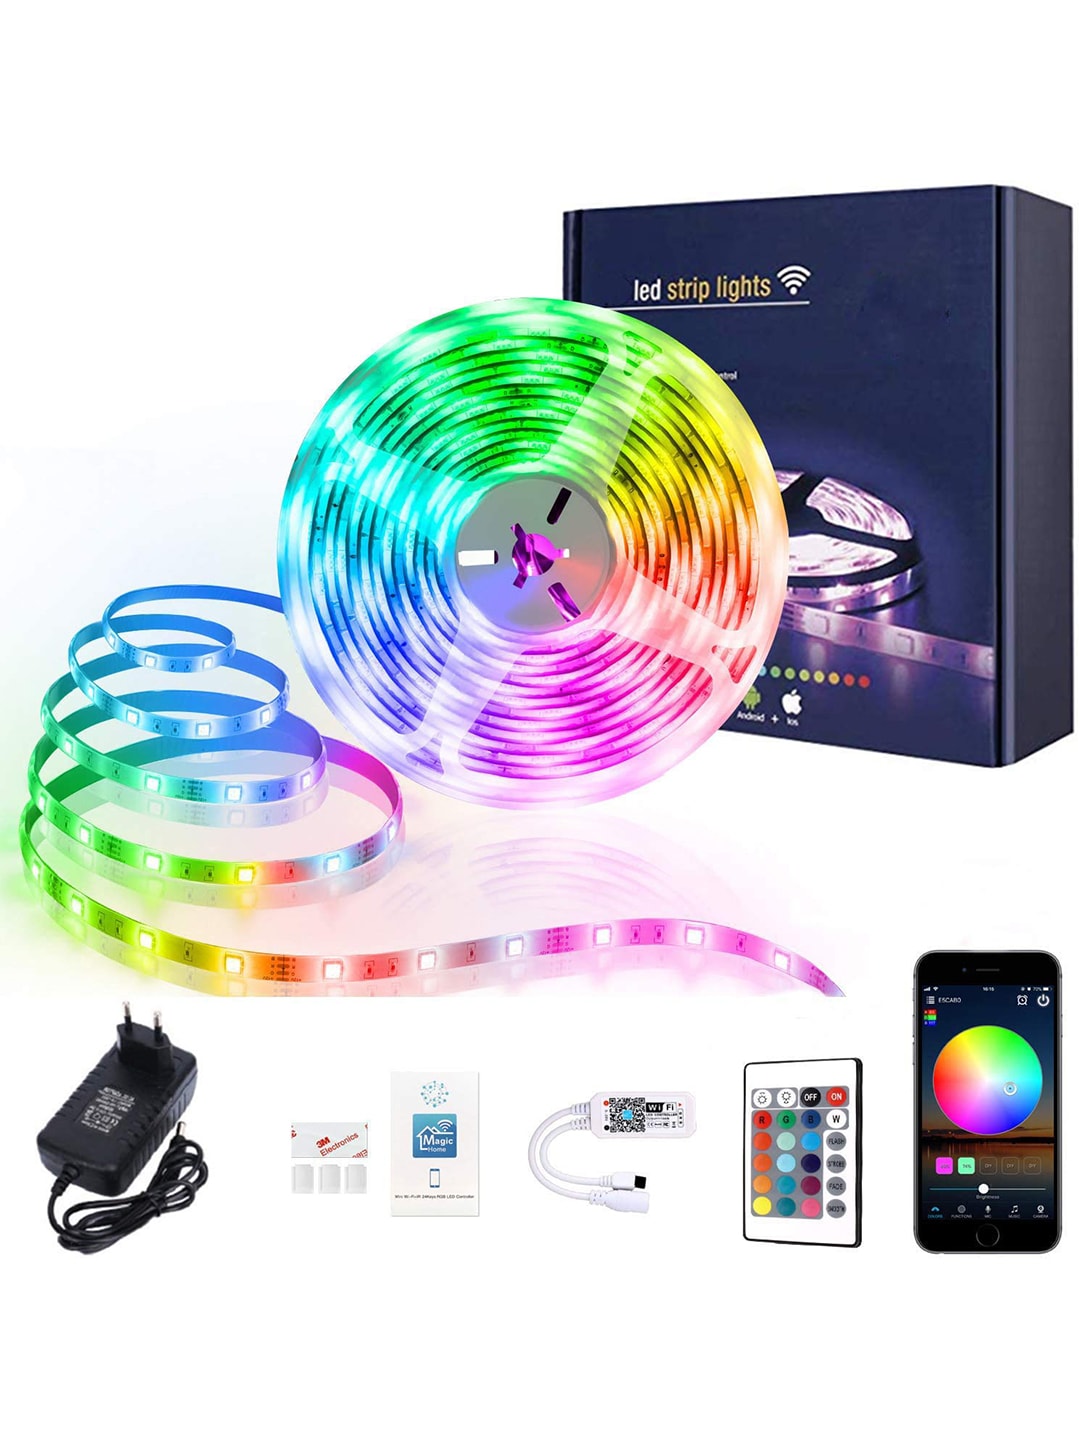 XERGY Multi-Coloured LED Strip Lights Smart Wi-Fi Control With IR Remote Price in India